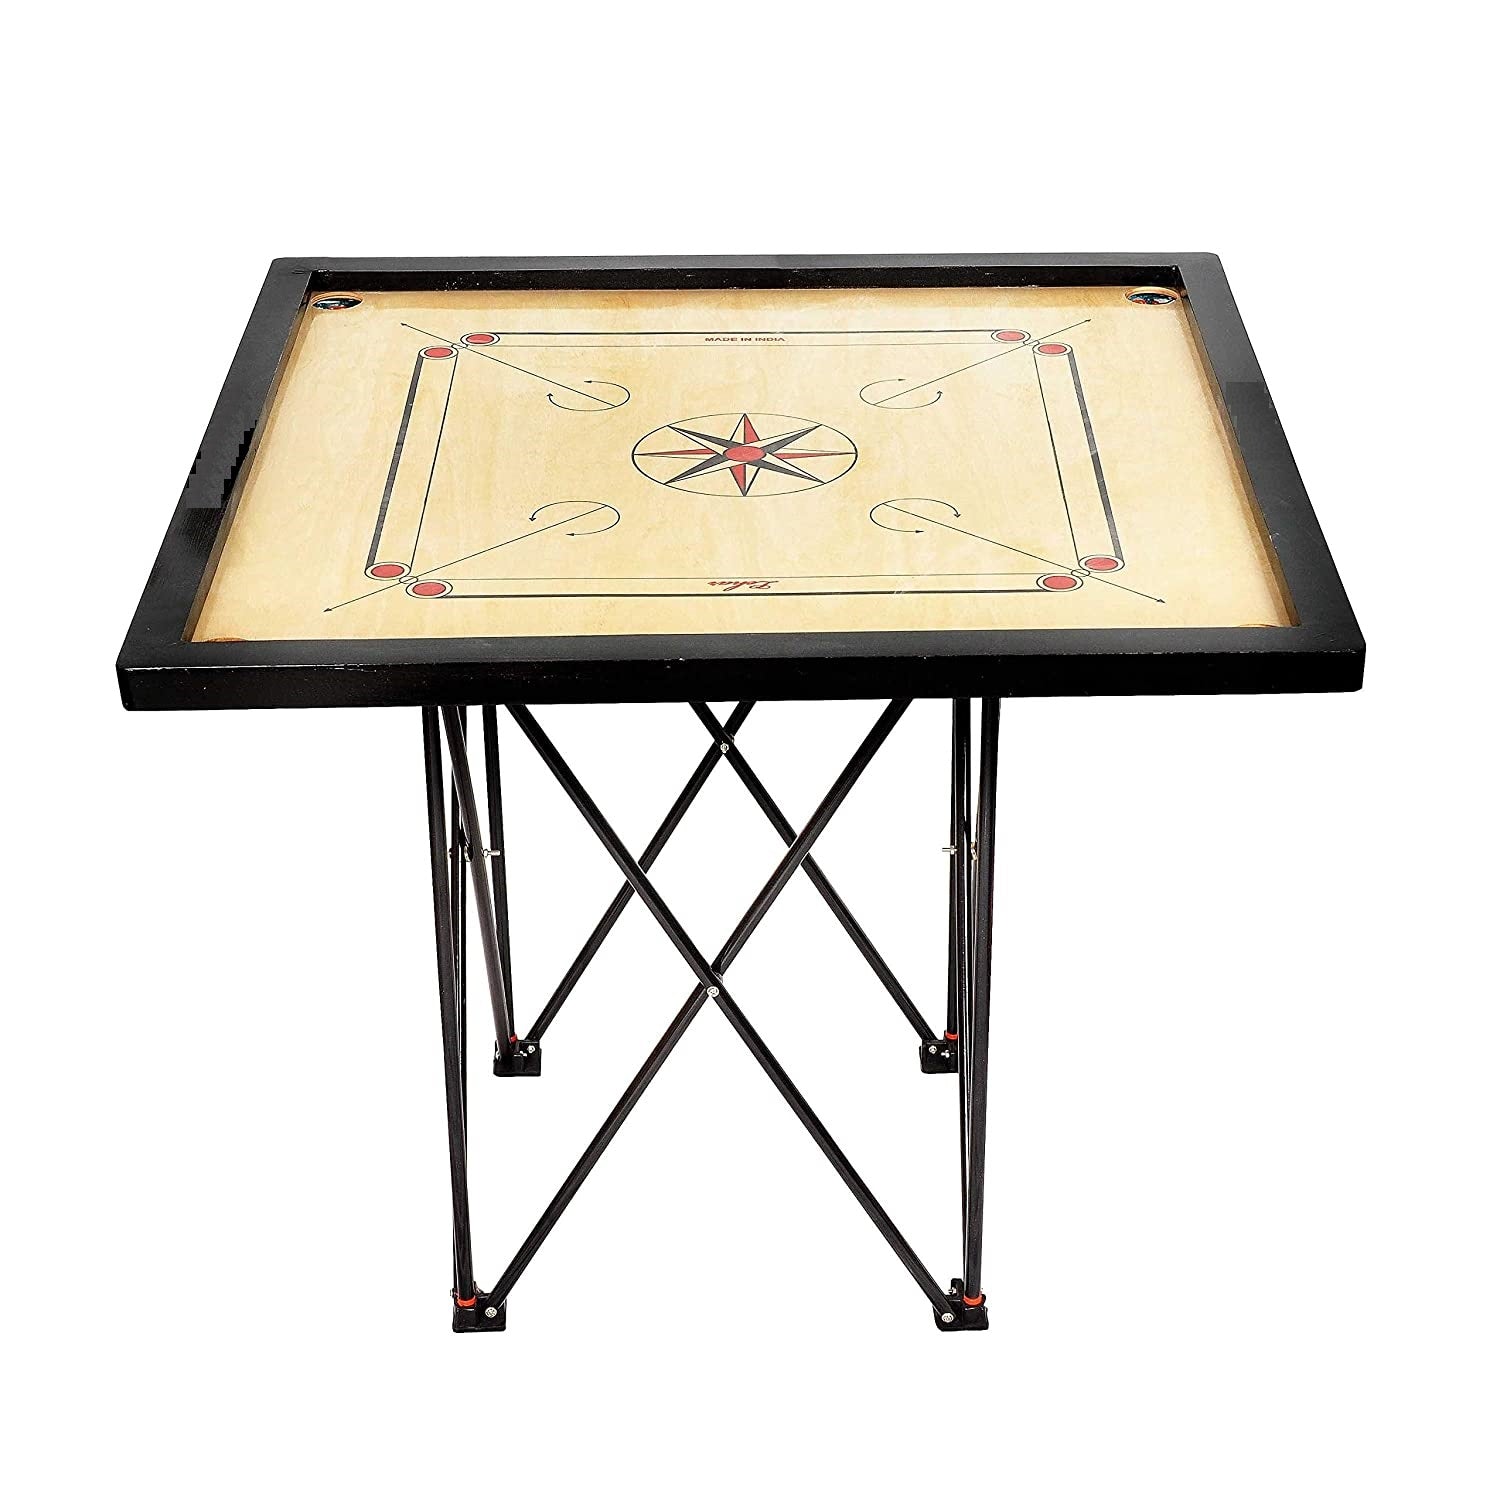 Carrom board without the cover.